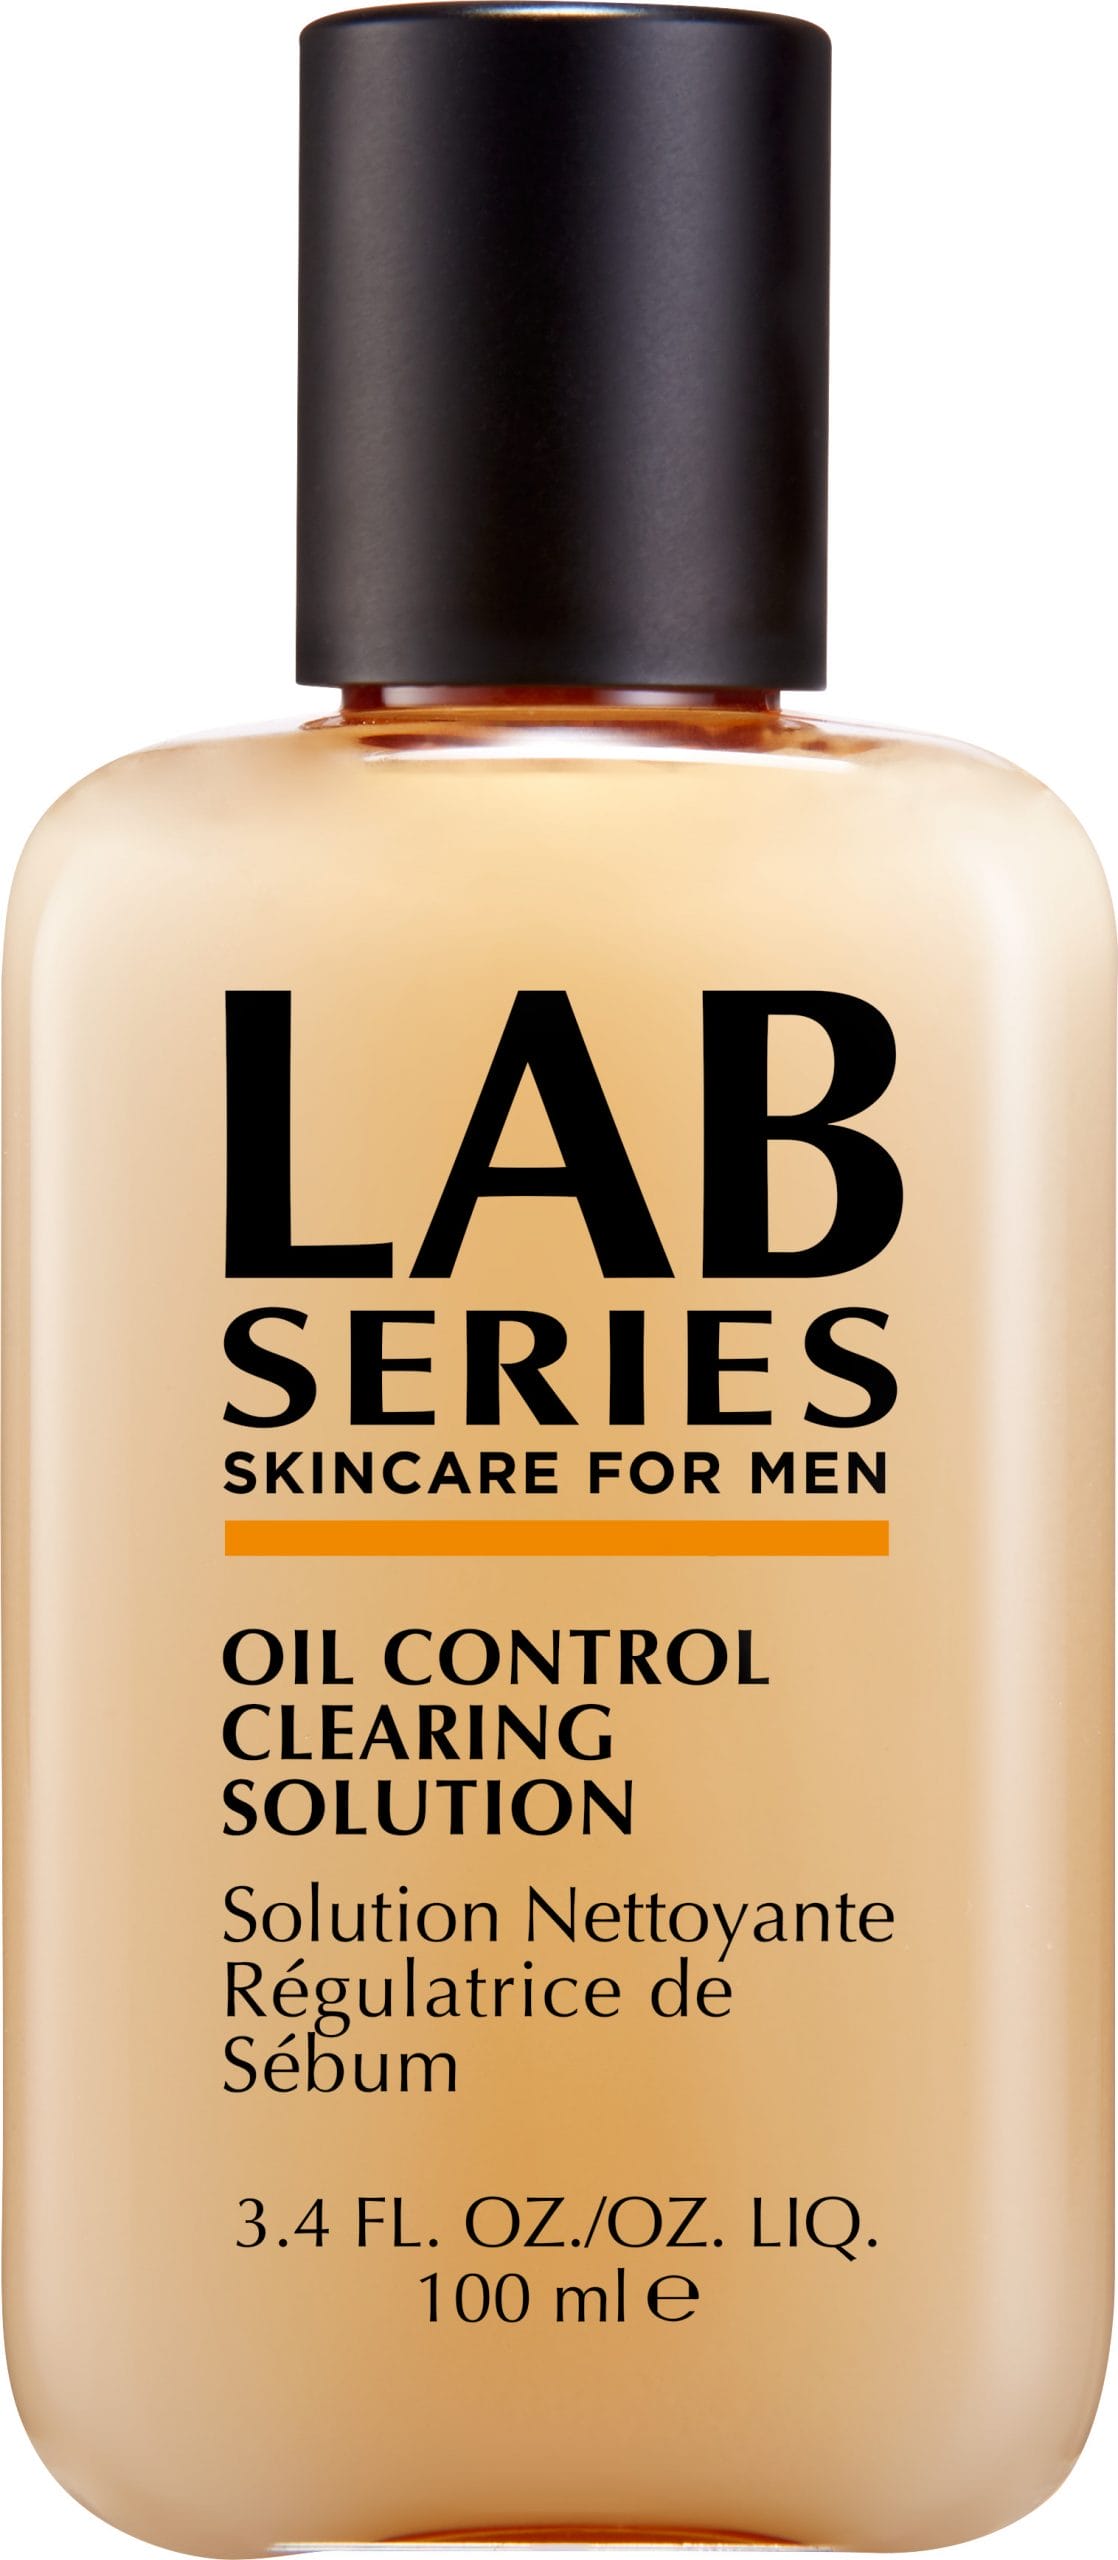 Clearing solution. Premium лосьон Skin Therapy для УЗЧ. Oil Laboratory. Clear solution.